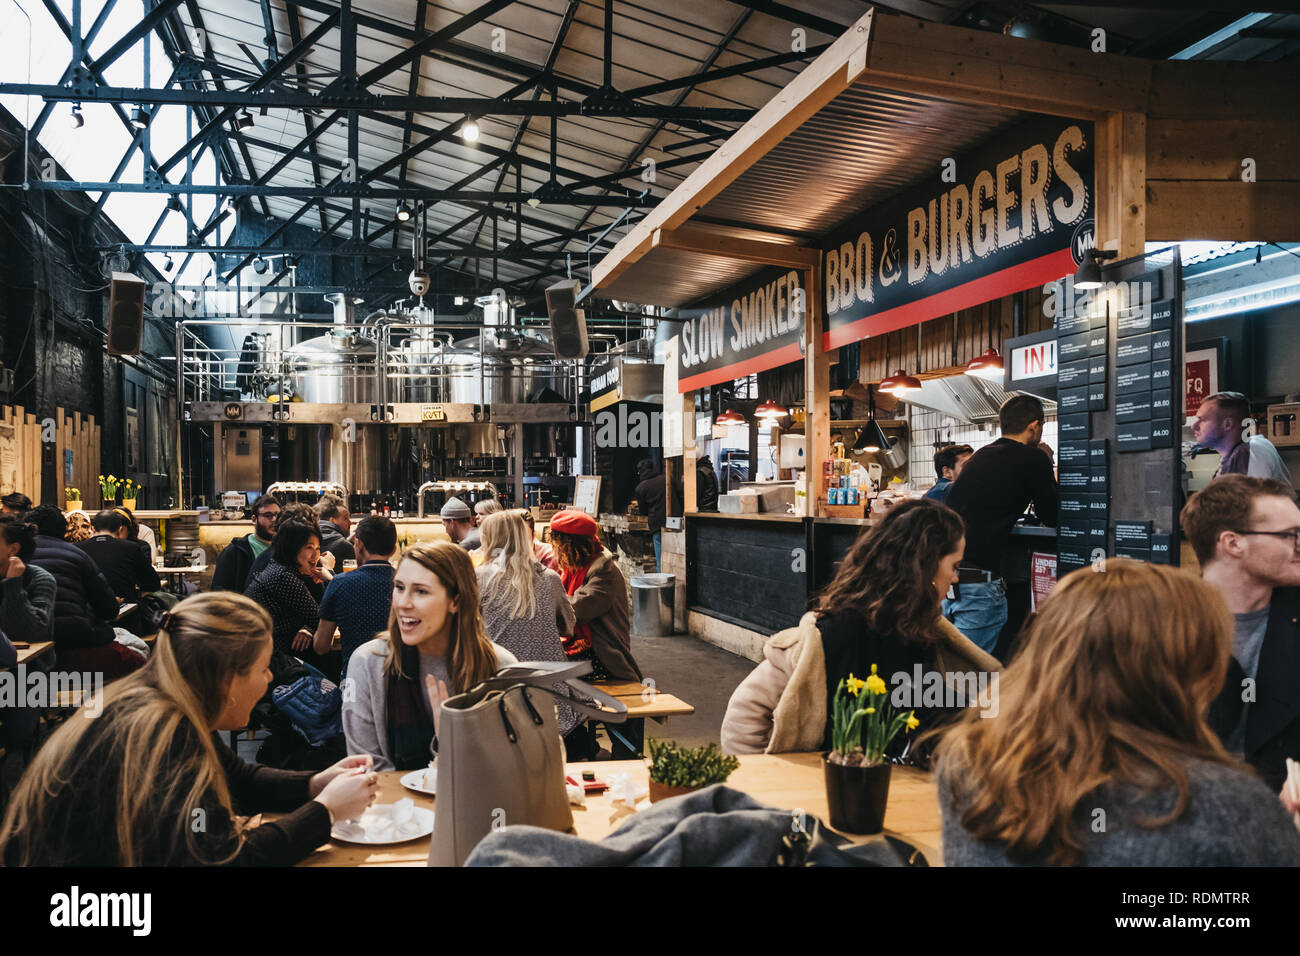 London, UK - January 13, 2019: People by BBQ and burger stand in Mercato Metropolitano, the first sustainable community market in London focused on re Stock Photo